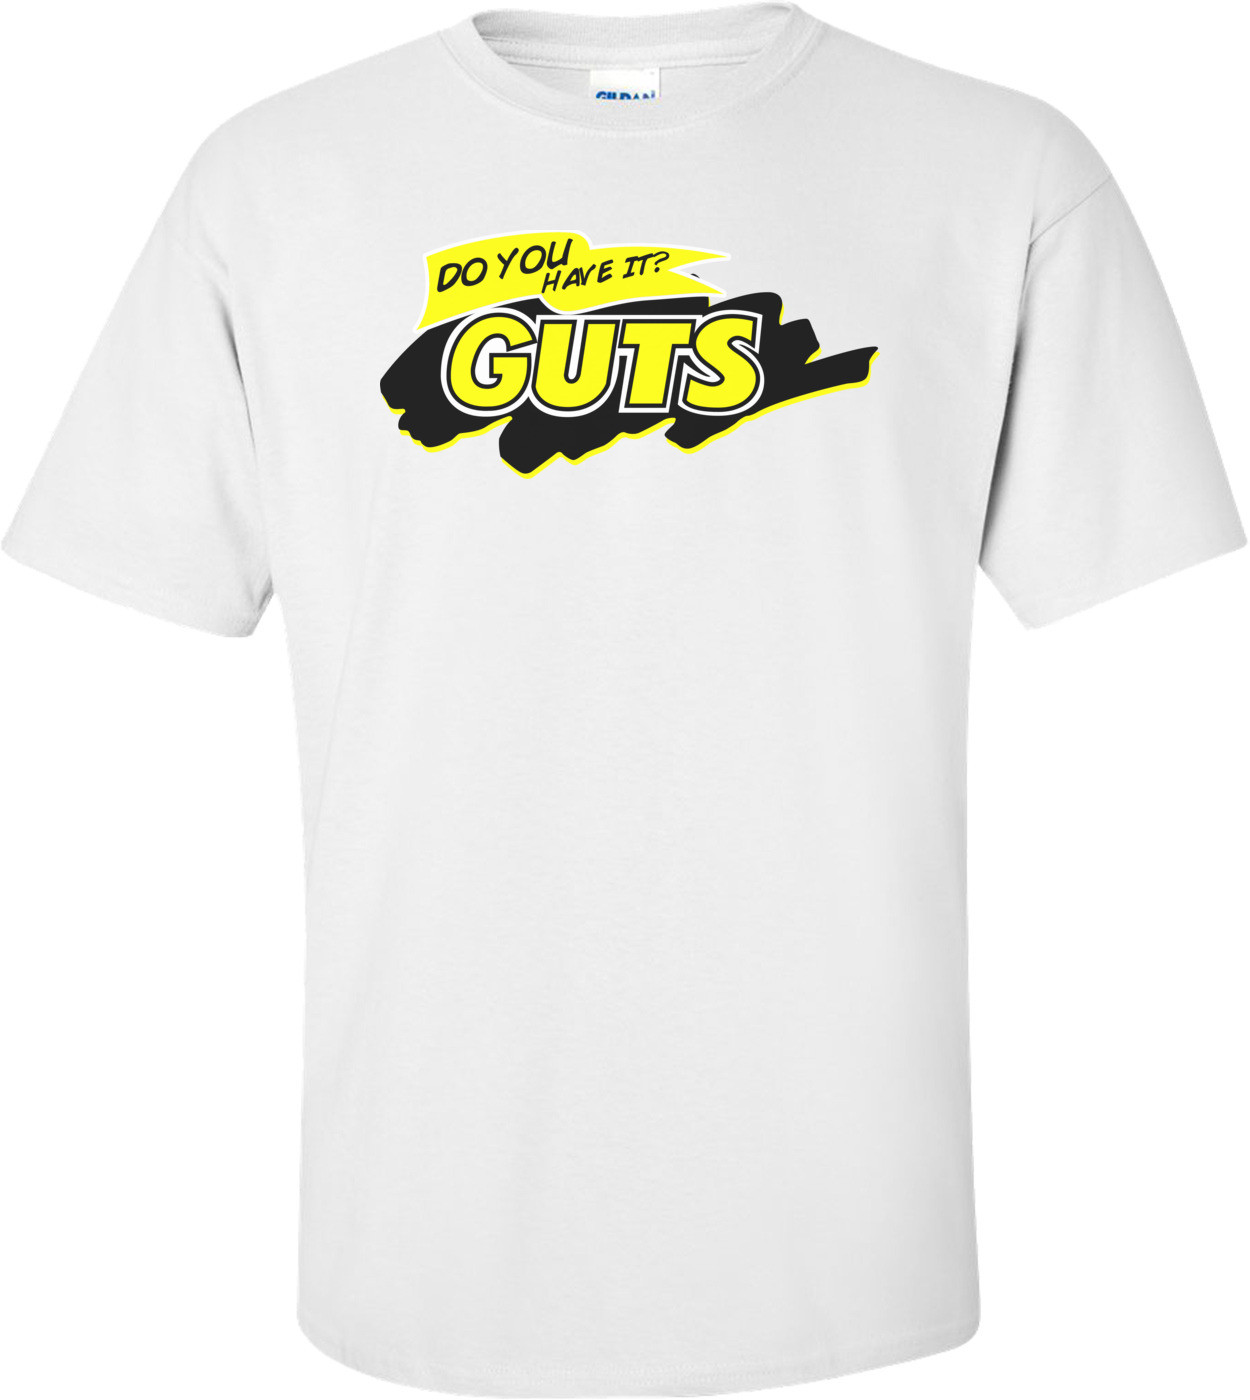 Guts Do You Have It - Nickelodeon T-shirt